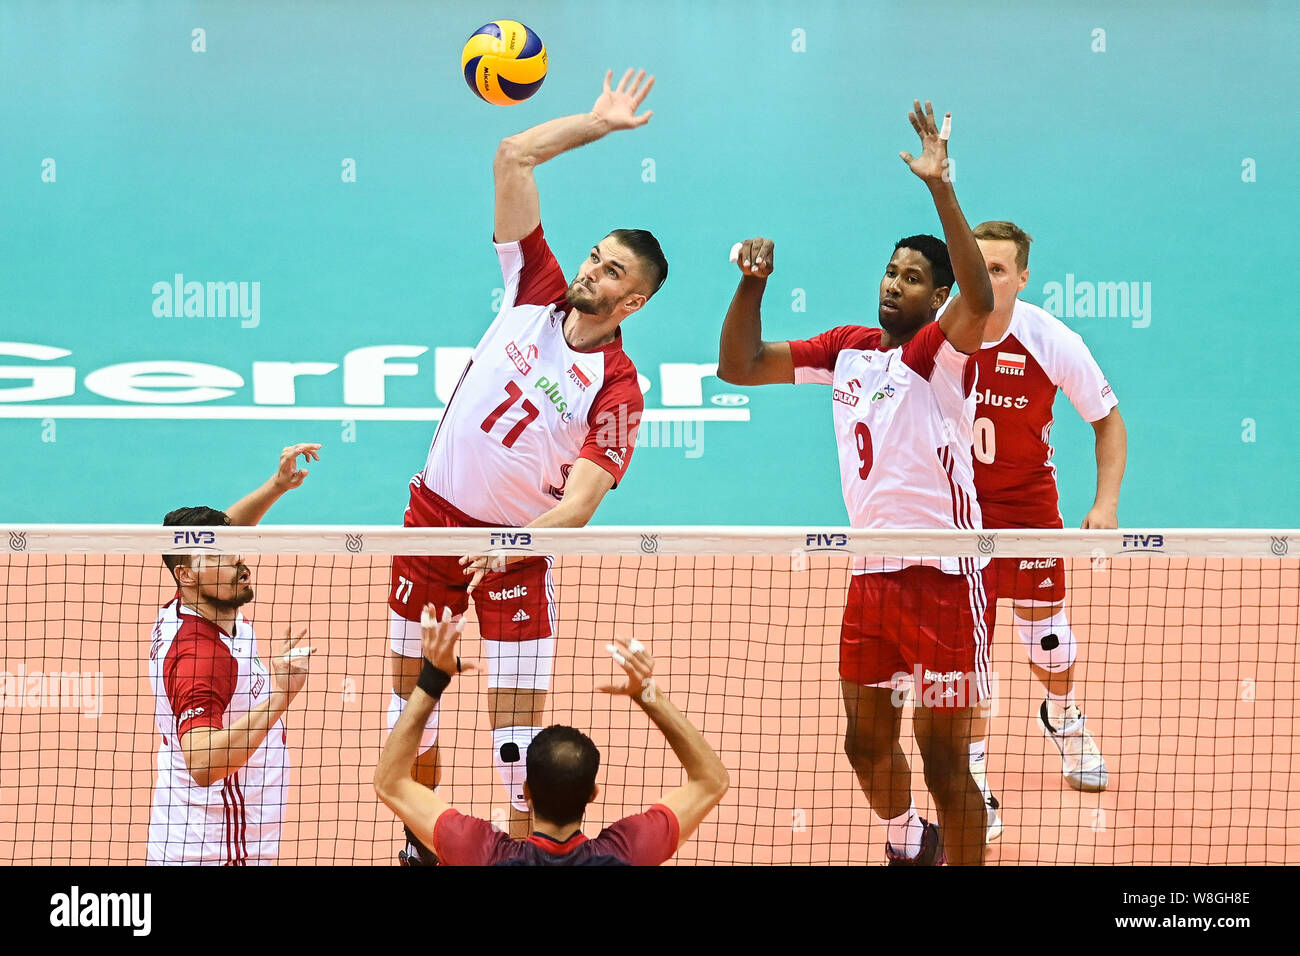 Karol Klos (L) and Wilfredo Leon (R) from Poland are seen in action during Men's Olympics Qualifiers Tournament Pool D match between Poland and Tunisia.(Poland beat Tunisia : 3-0) Stock Photo